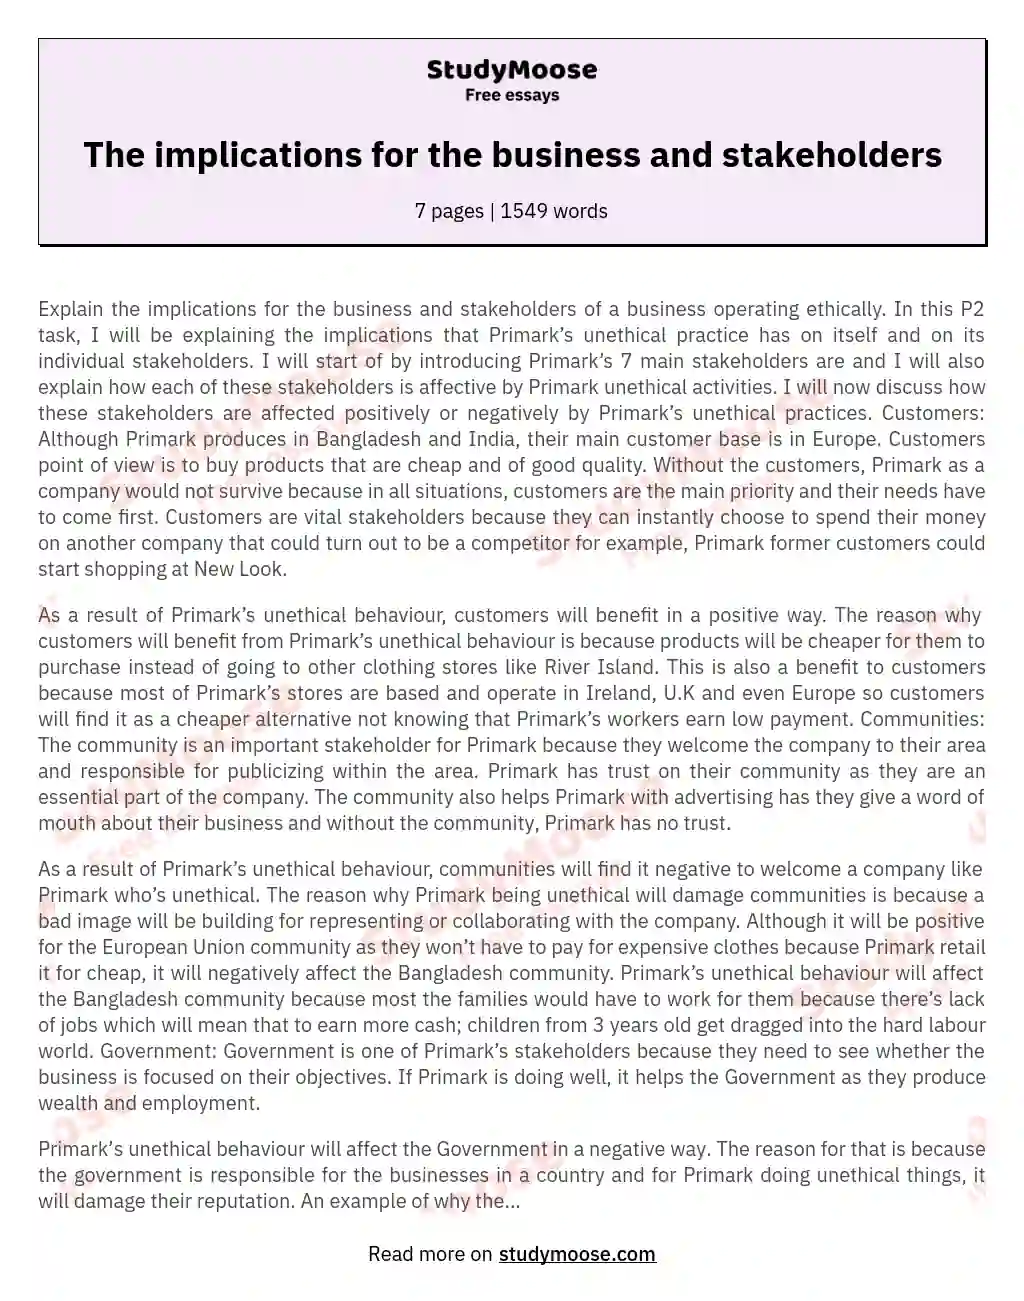 The implications for the business and stakeholders